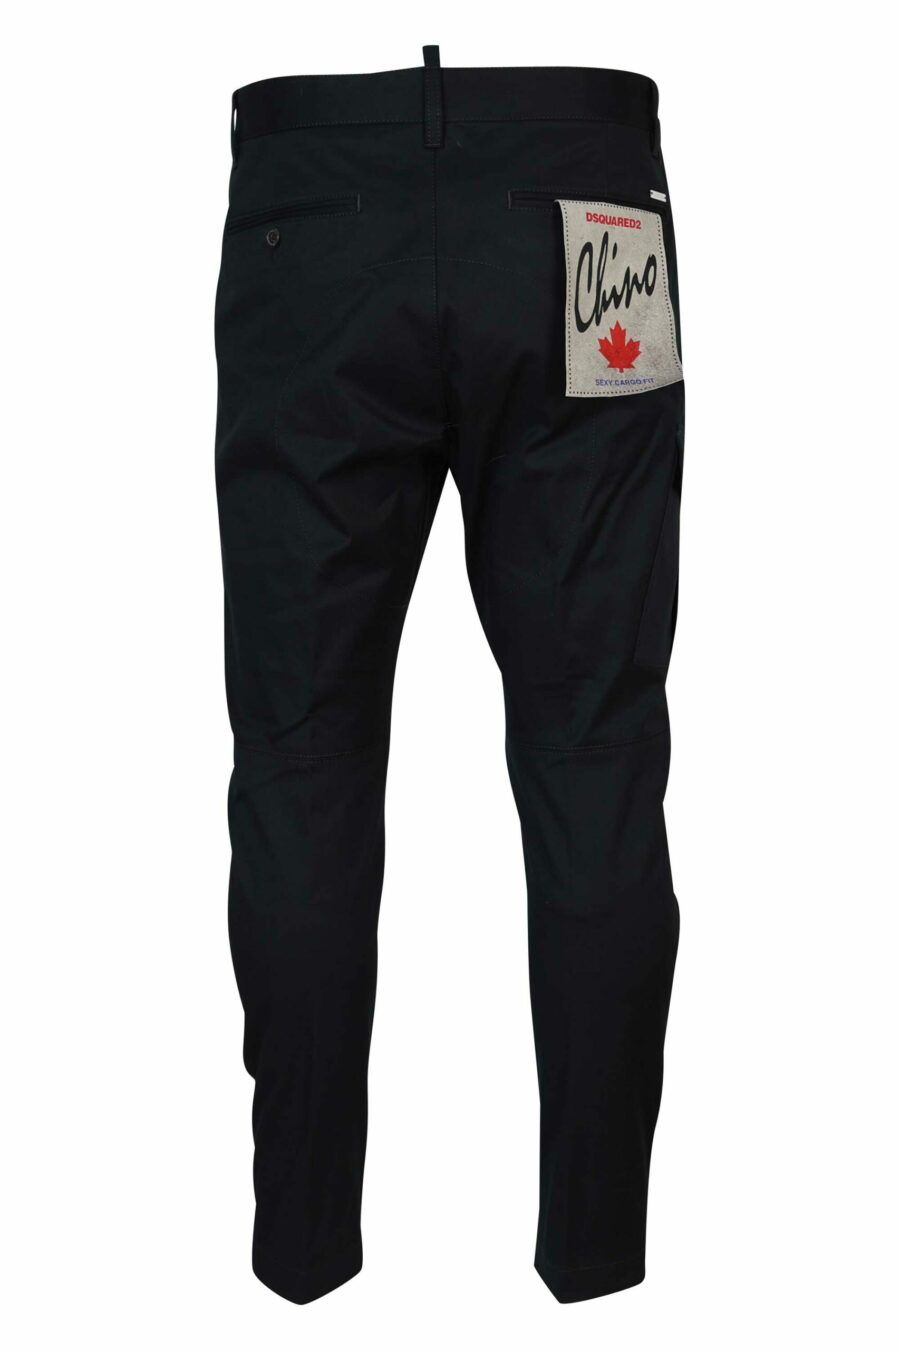 Black cargo trousers "sexy cargo" - 8054148389000 2 scaled